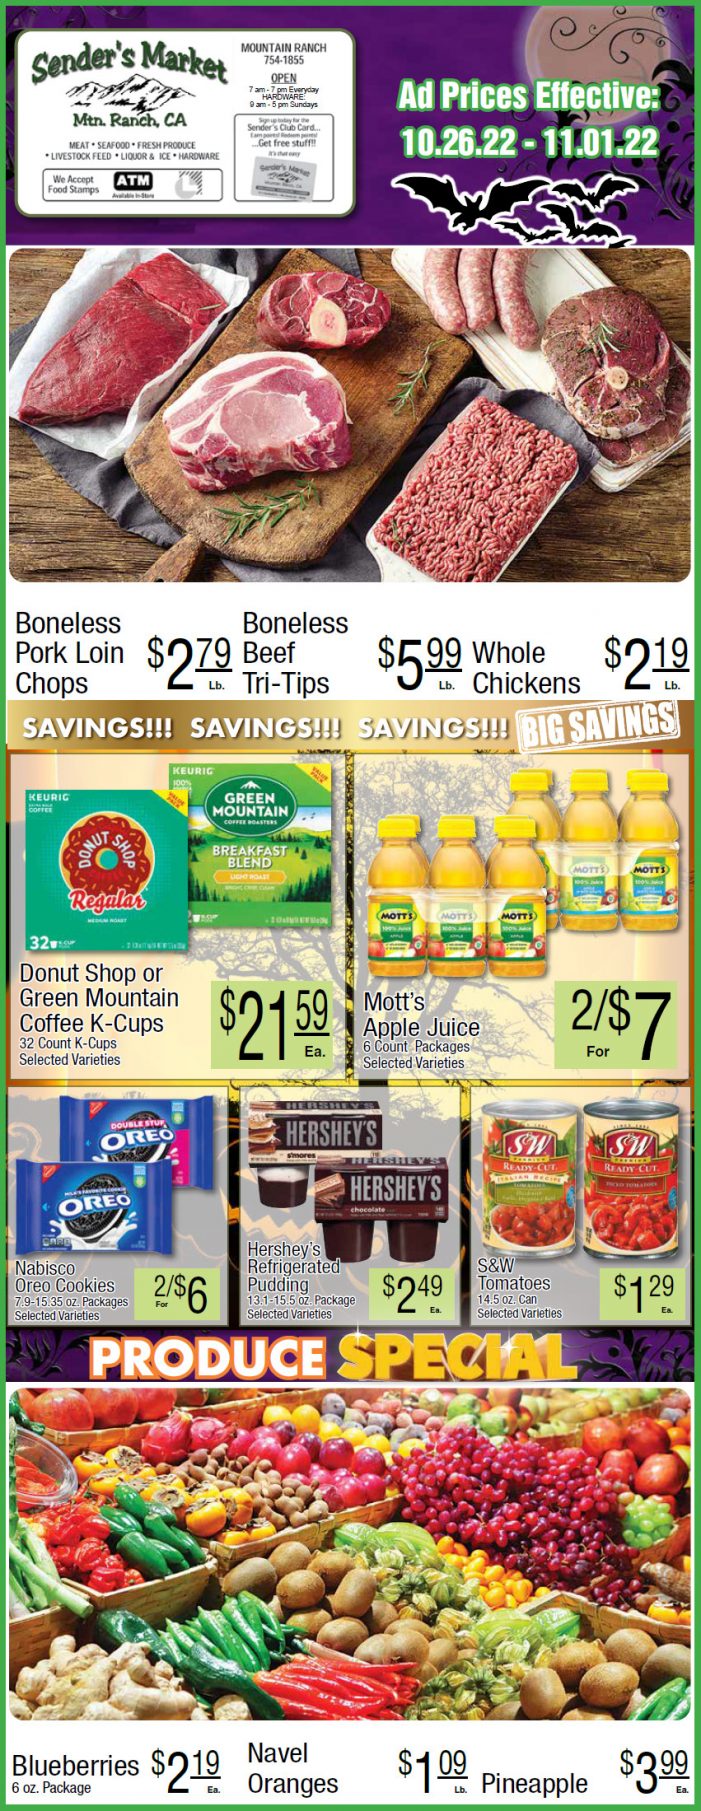 Sender’s Market Weekly Ad & Grocery Specials Through November 1st. Shop Local & Save!